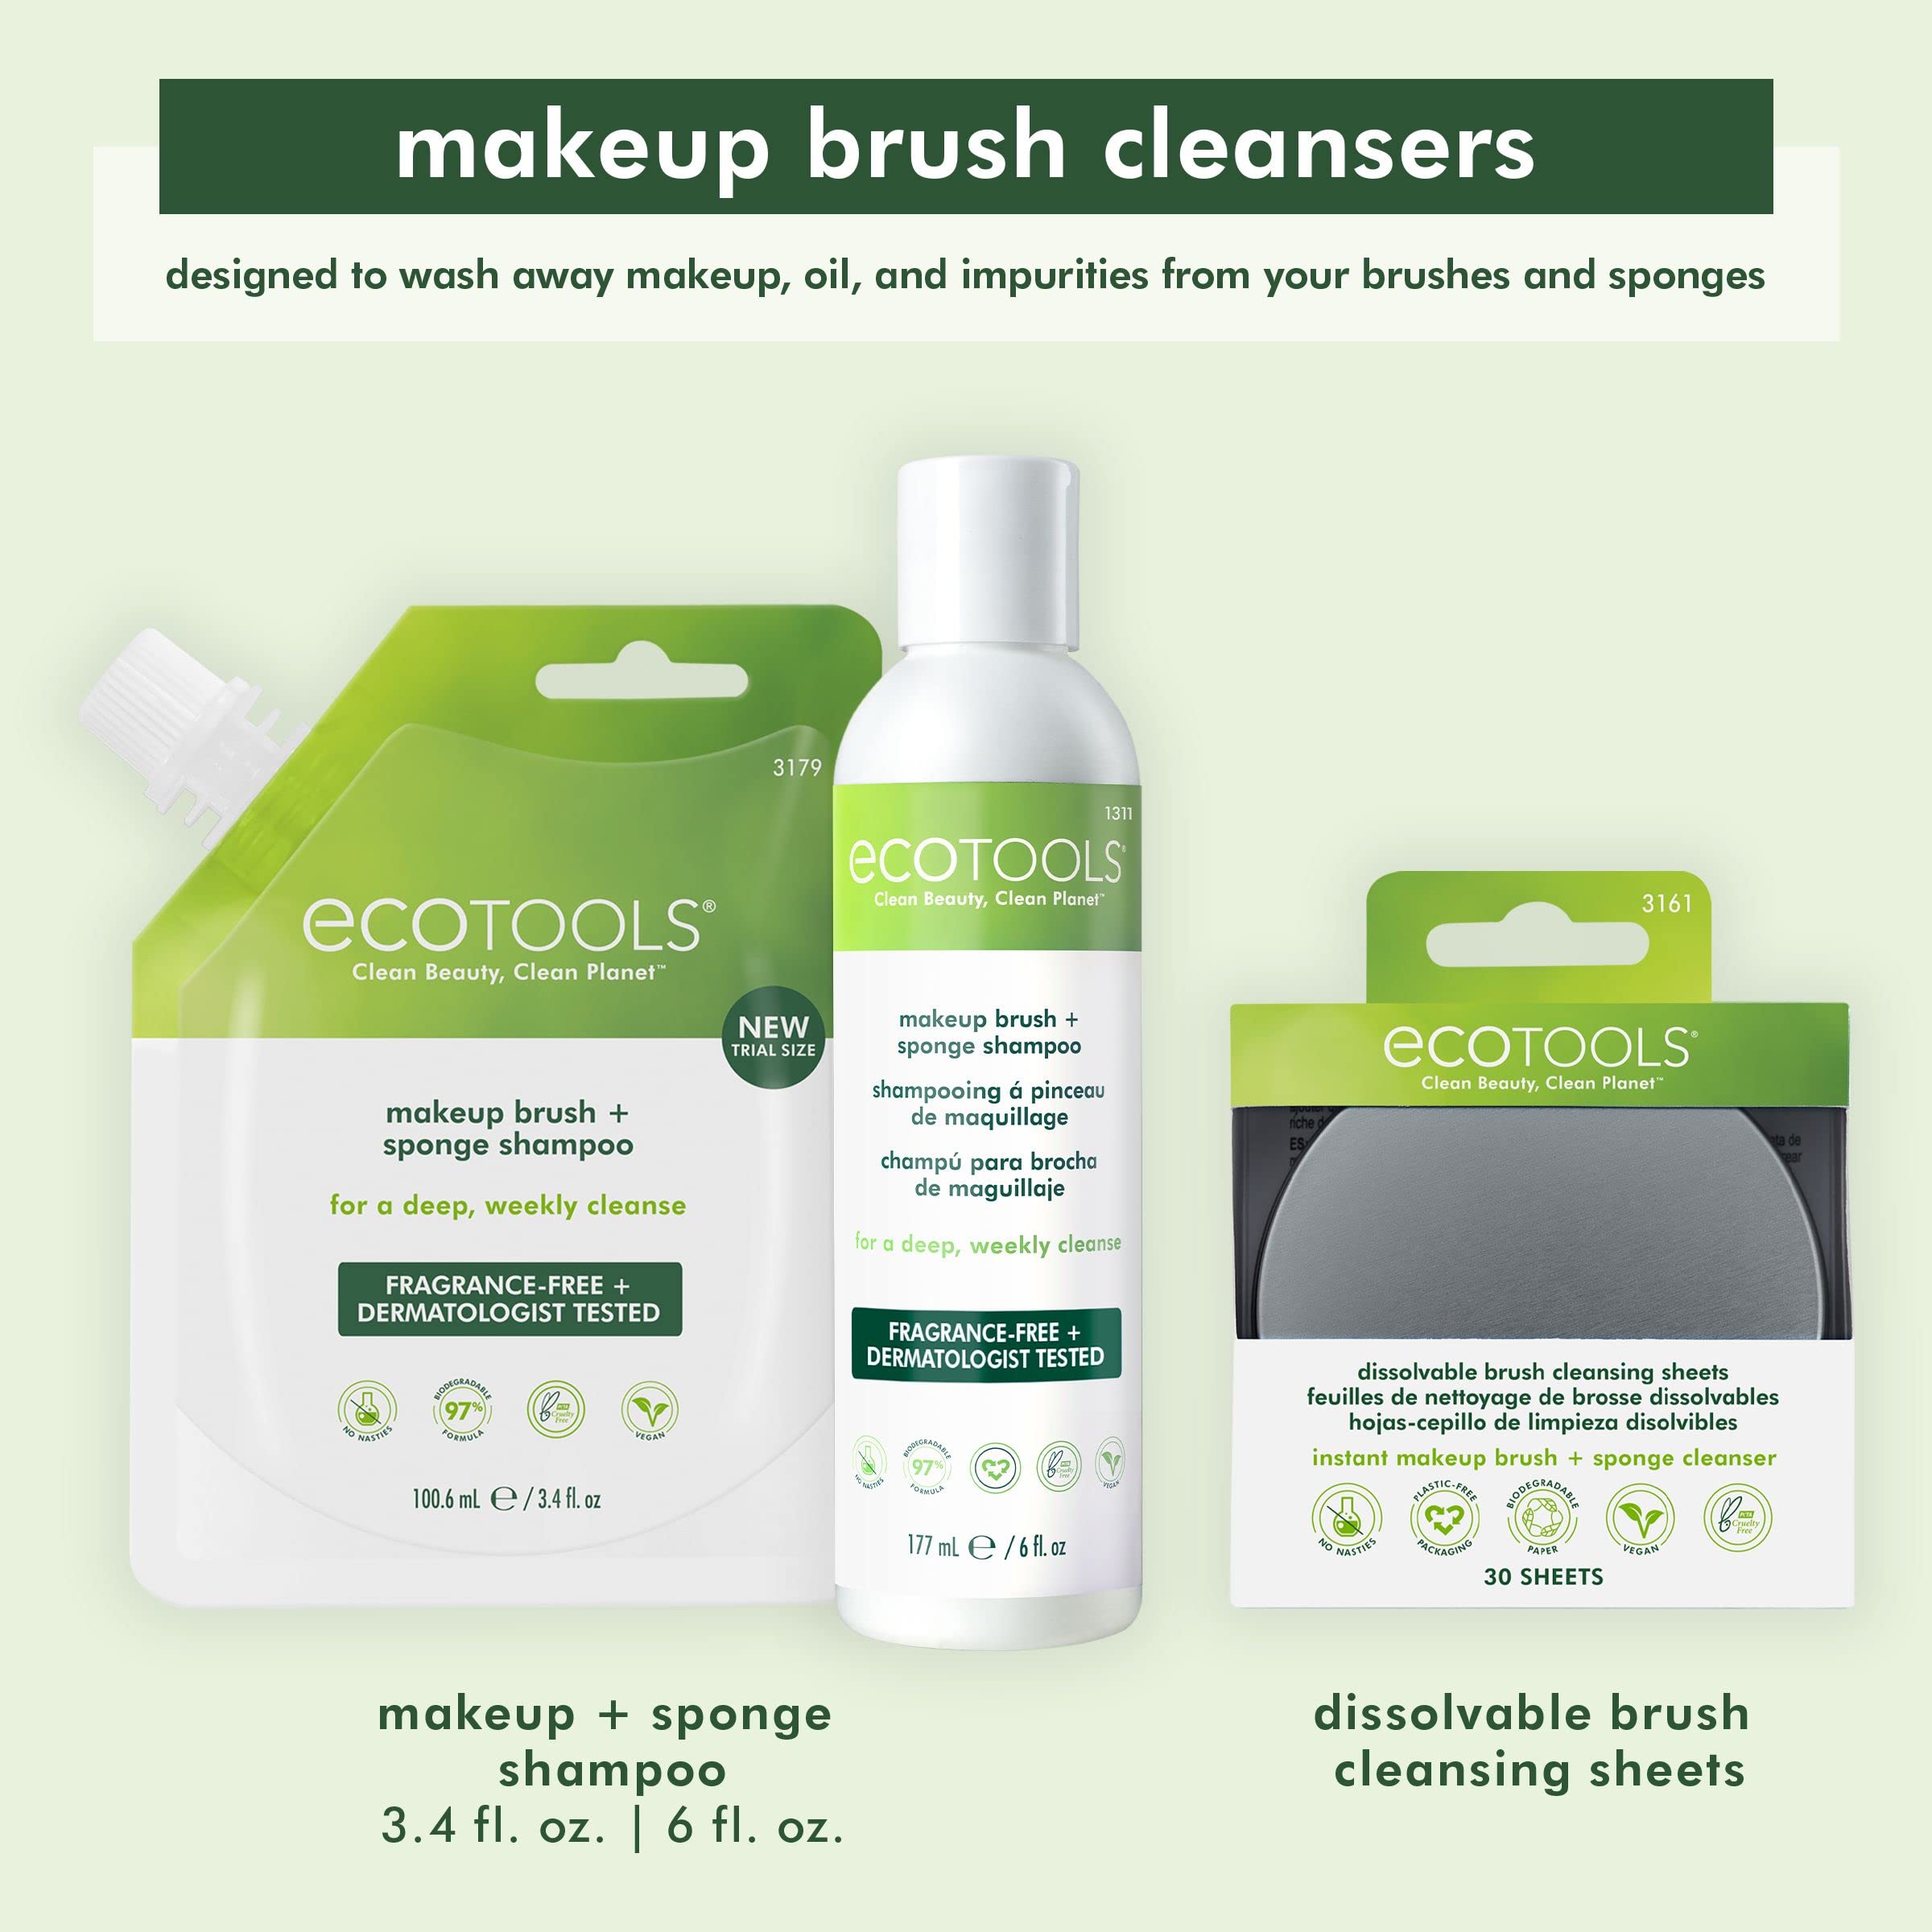 EcoTools Makeup Brush and Sponge Shampoo, Removes Makeup, Dirt, & Impurities From Makeup Brushes & Sponges, Fragrance-Free, Vegan, & Cruelty-Free, 6 fl.oz./ 177 ml, Packaging May Vary, 2 Count